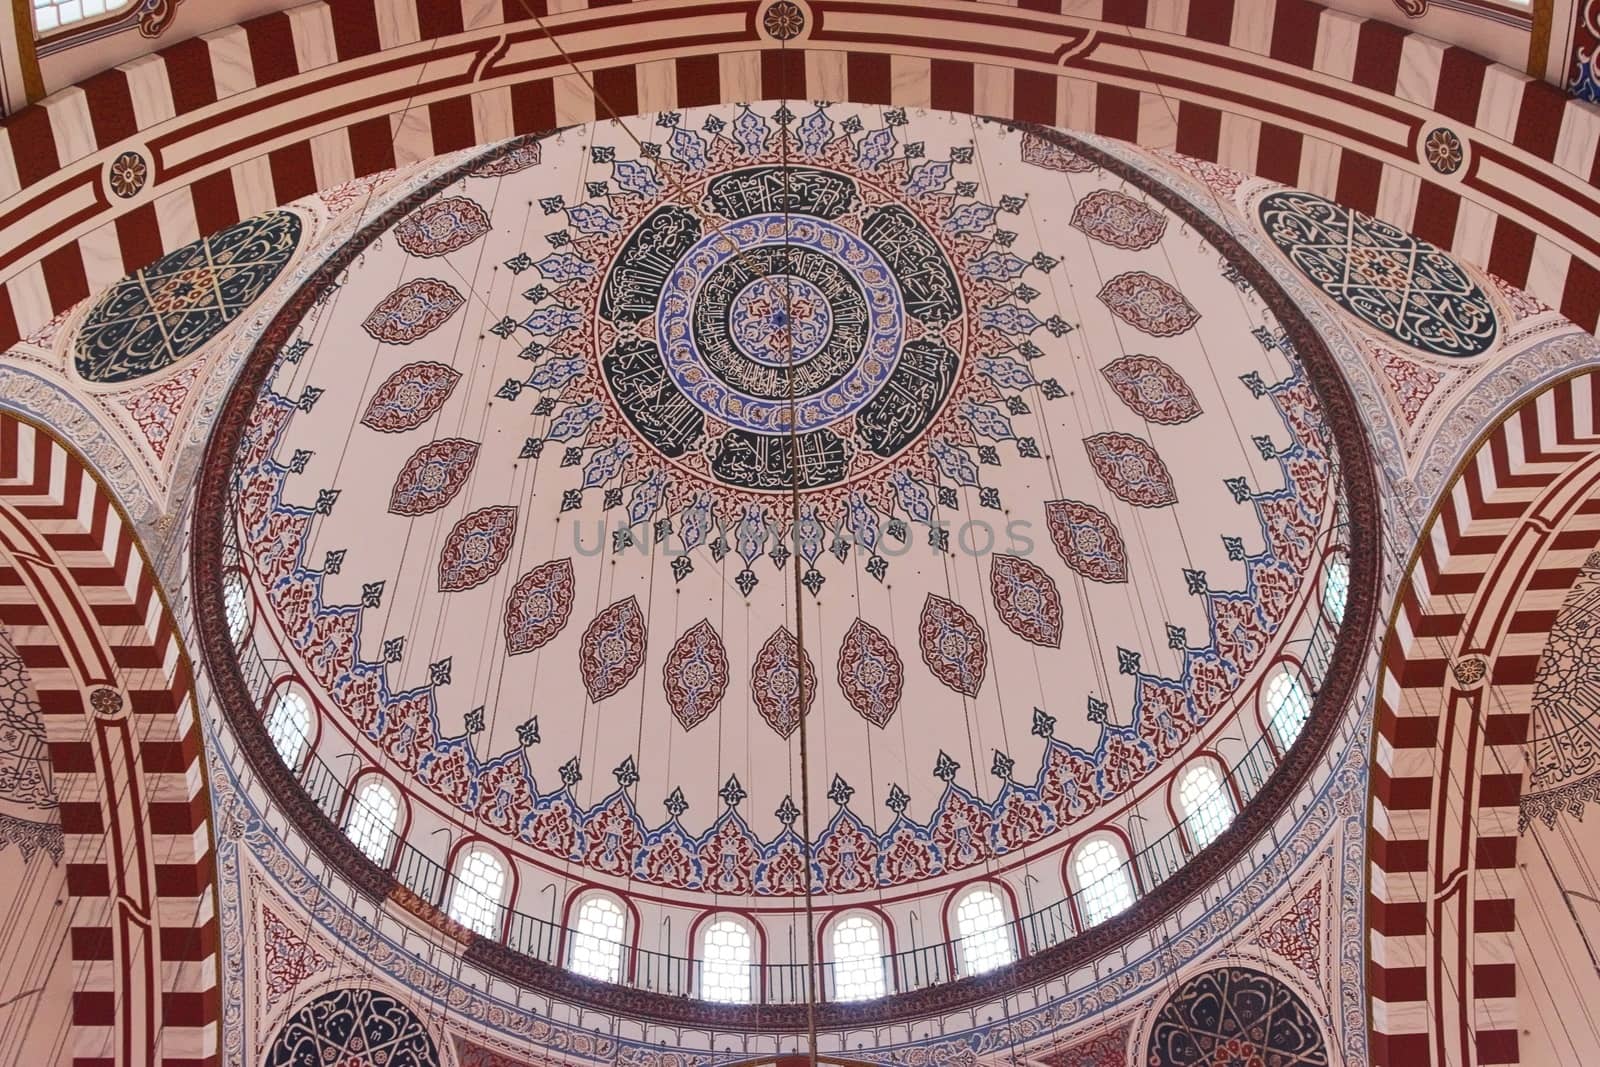 Sehzade Mosque, an Ottoman imperial mosque in Istanbul, Turkey. Interior view of the main dome. Architectural detail.